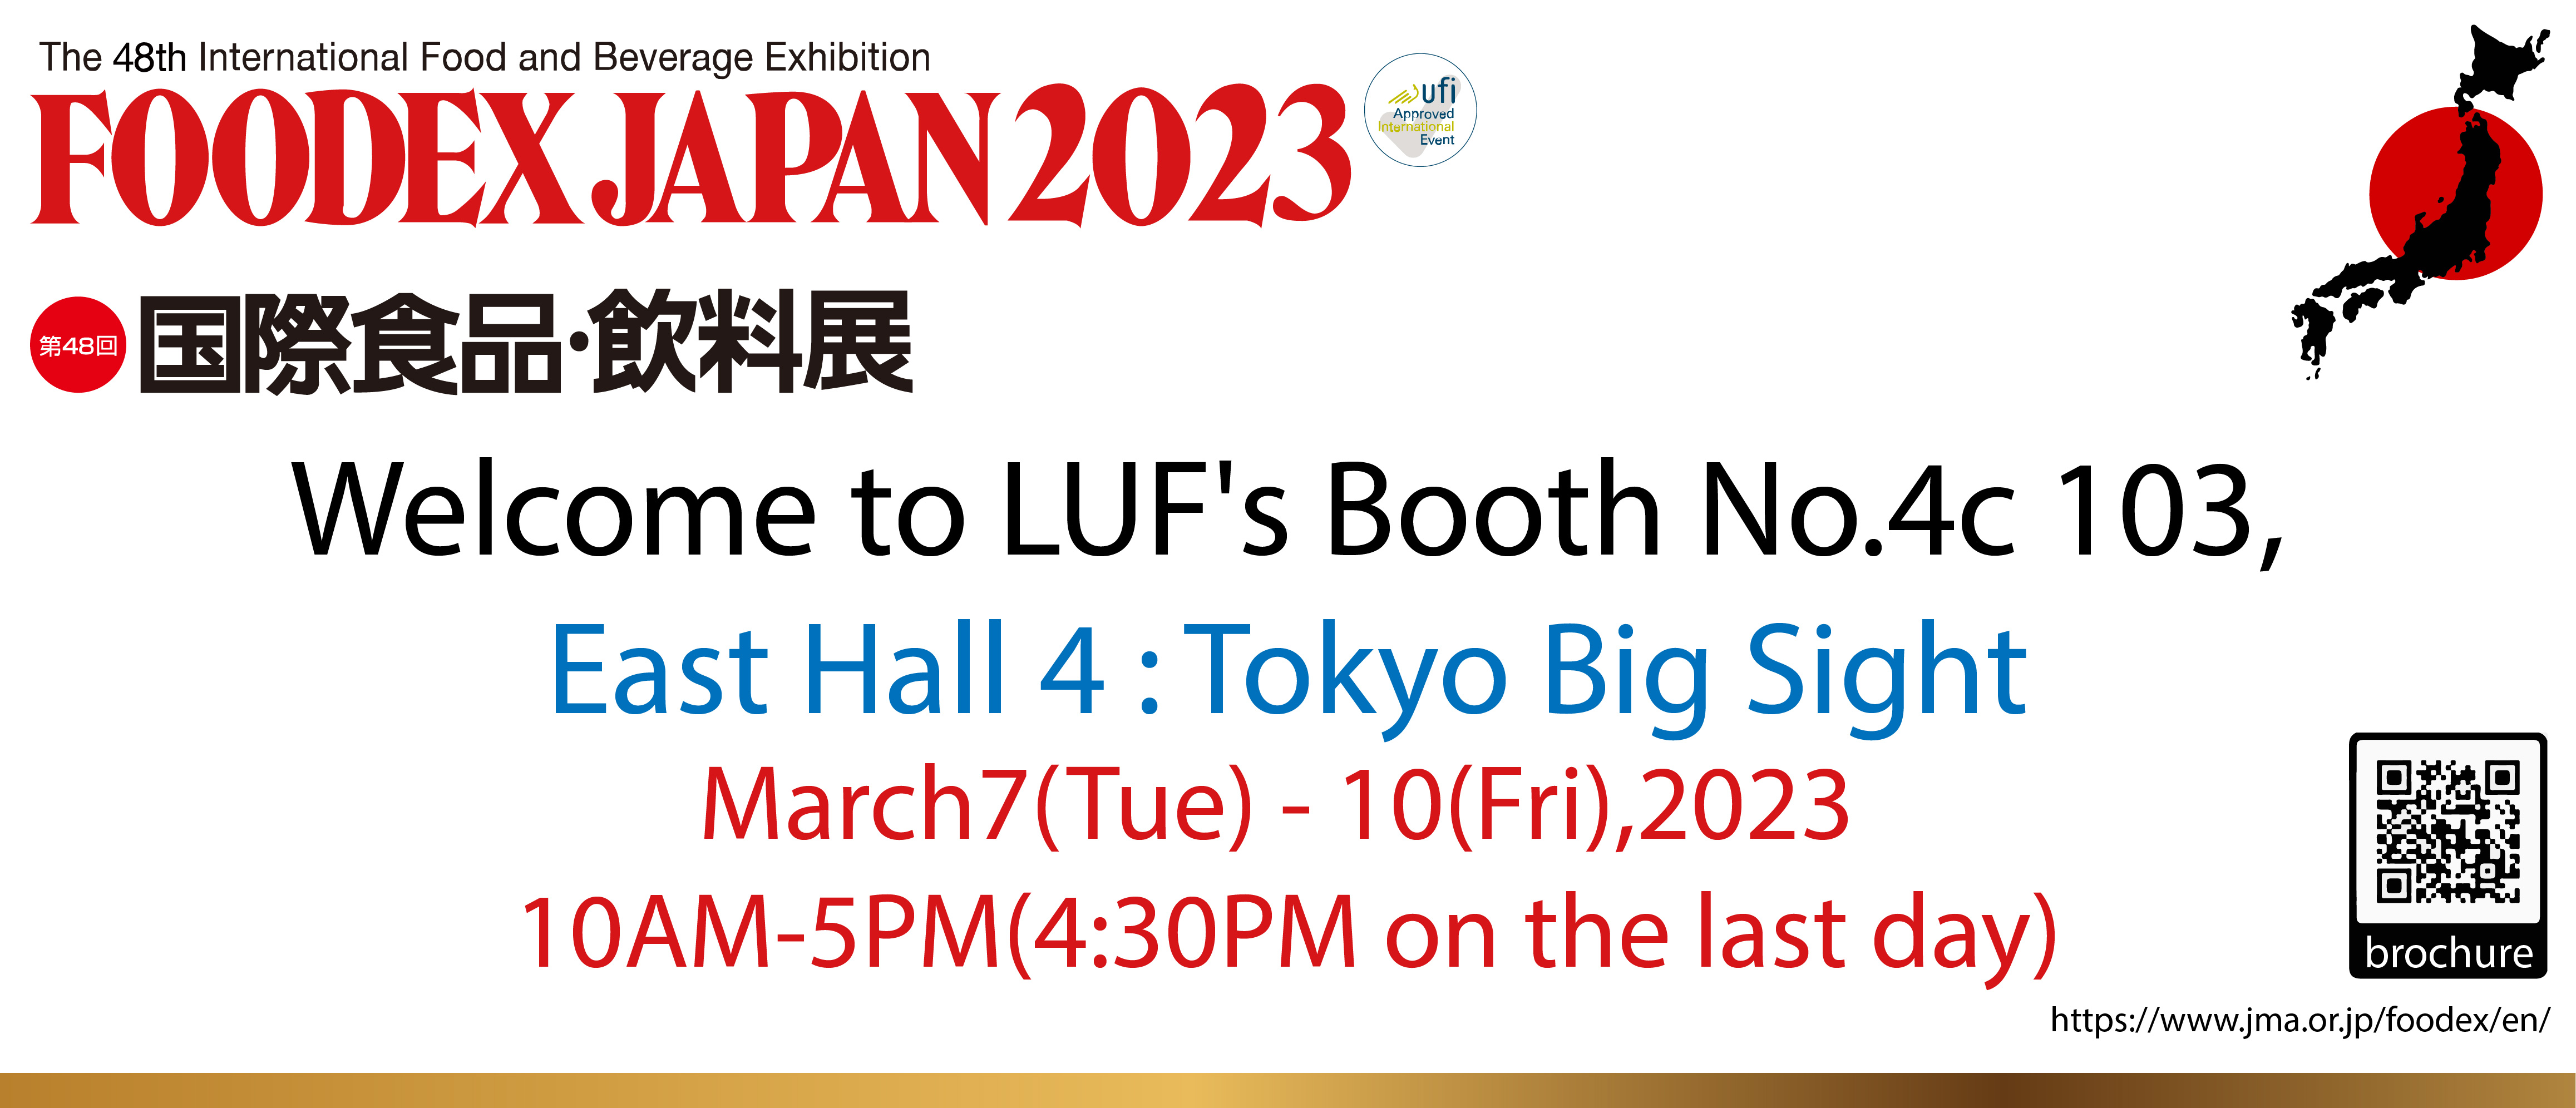 FOODEX JAPAN : LUF TO EXHIBIT IN MARCH'23